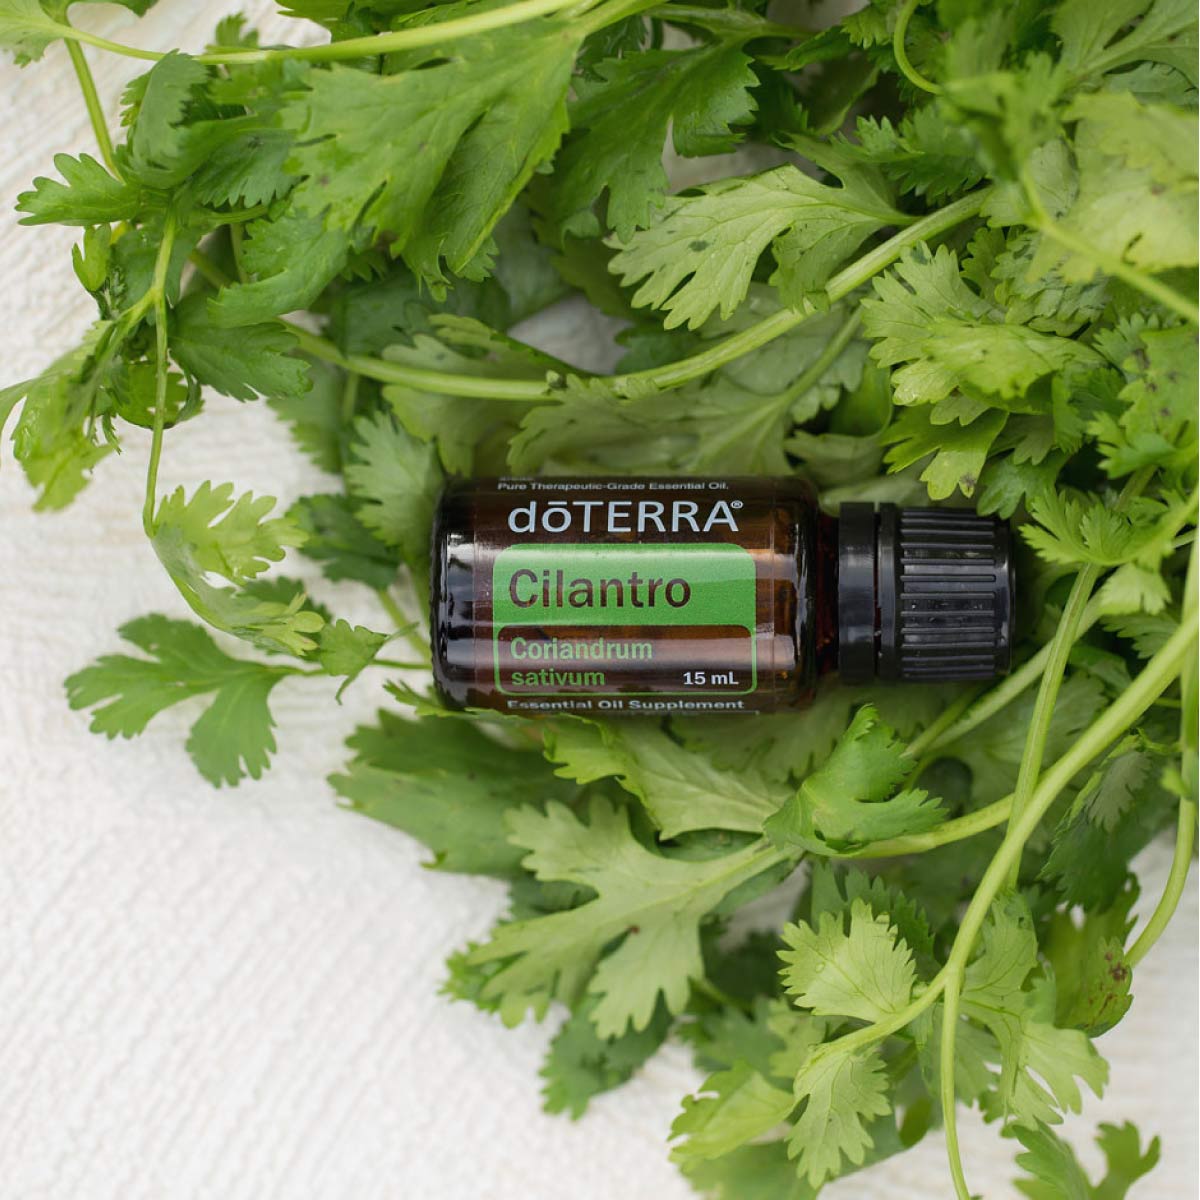 Fresh cilantro leaves and doTERRA Cilantro essential oil bottle.What are the benefits of Cilantro oil? Cilantro essential oil is beneficial for the skin, can add flavor when cooking, and can even help with household cleaning.